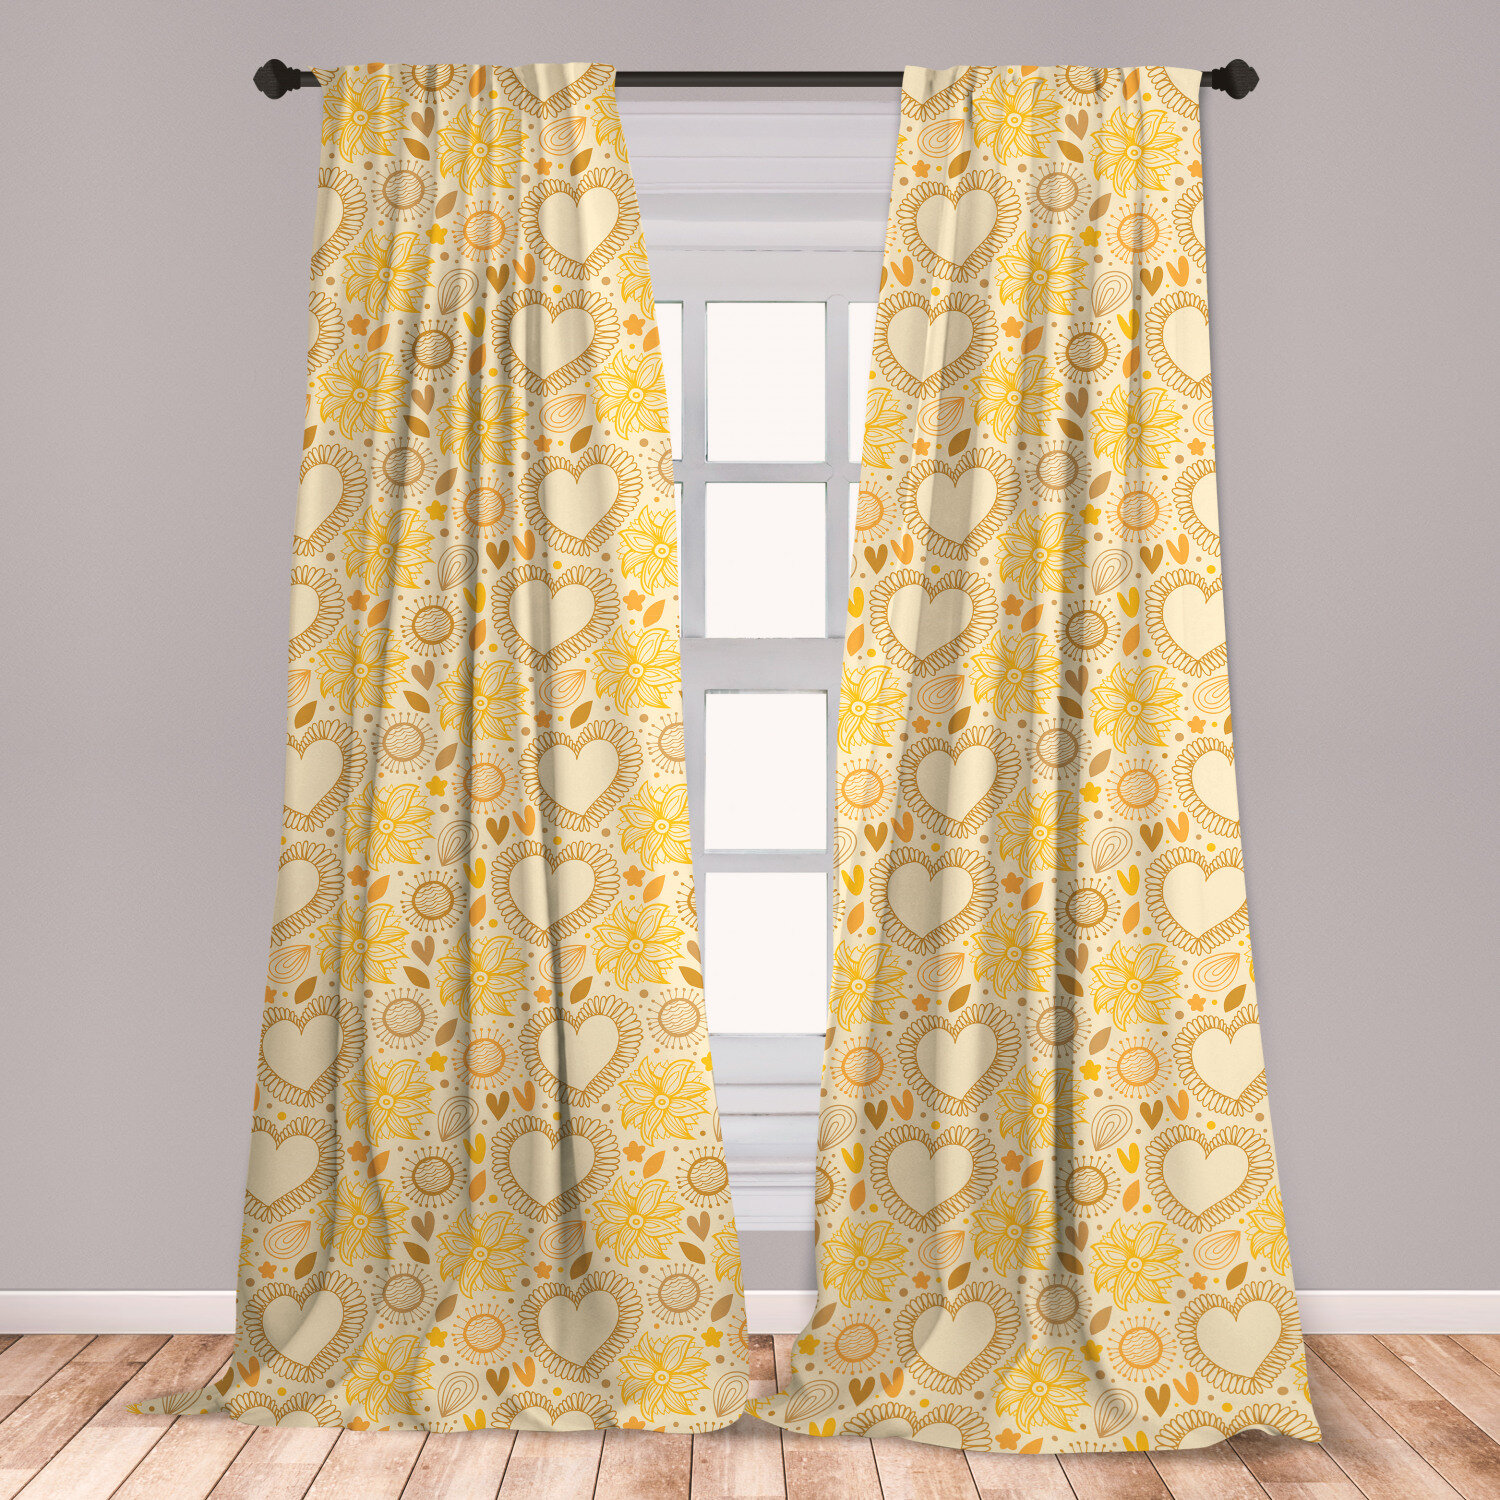 East Urban Home Ambesonne Yellow Curtains